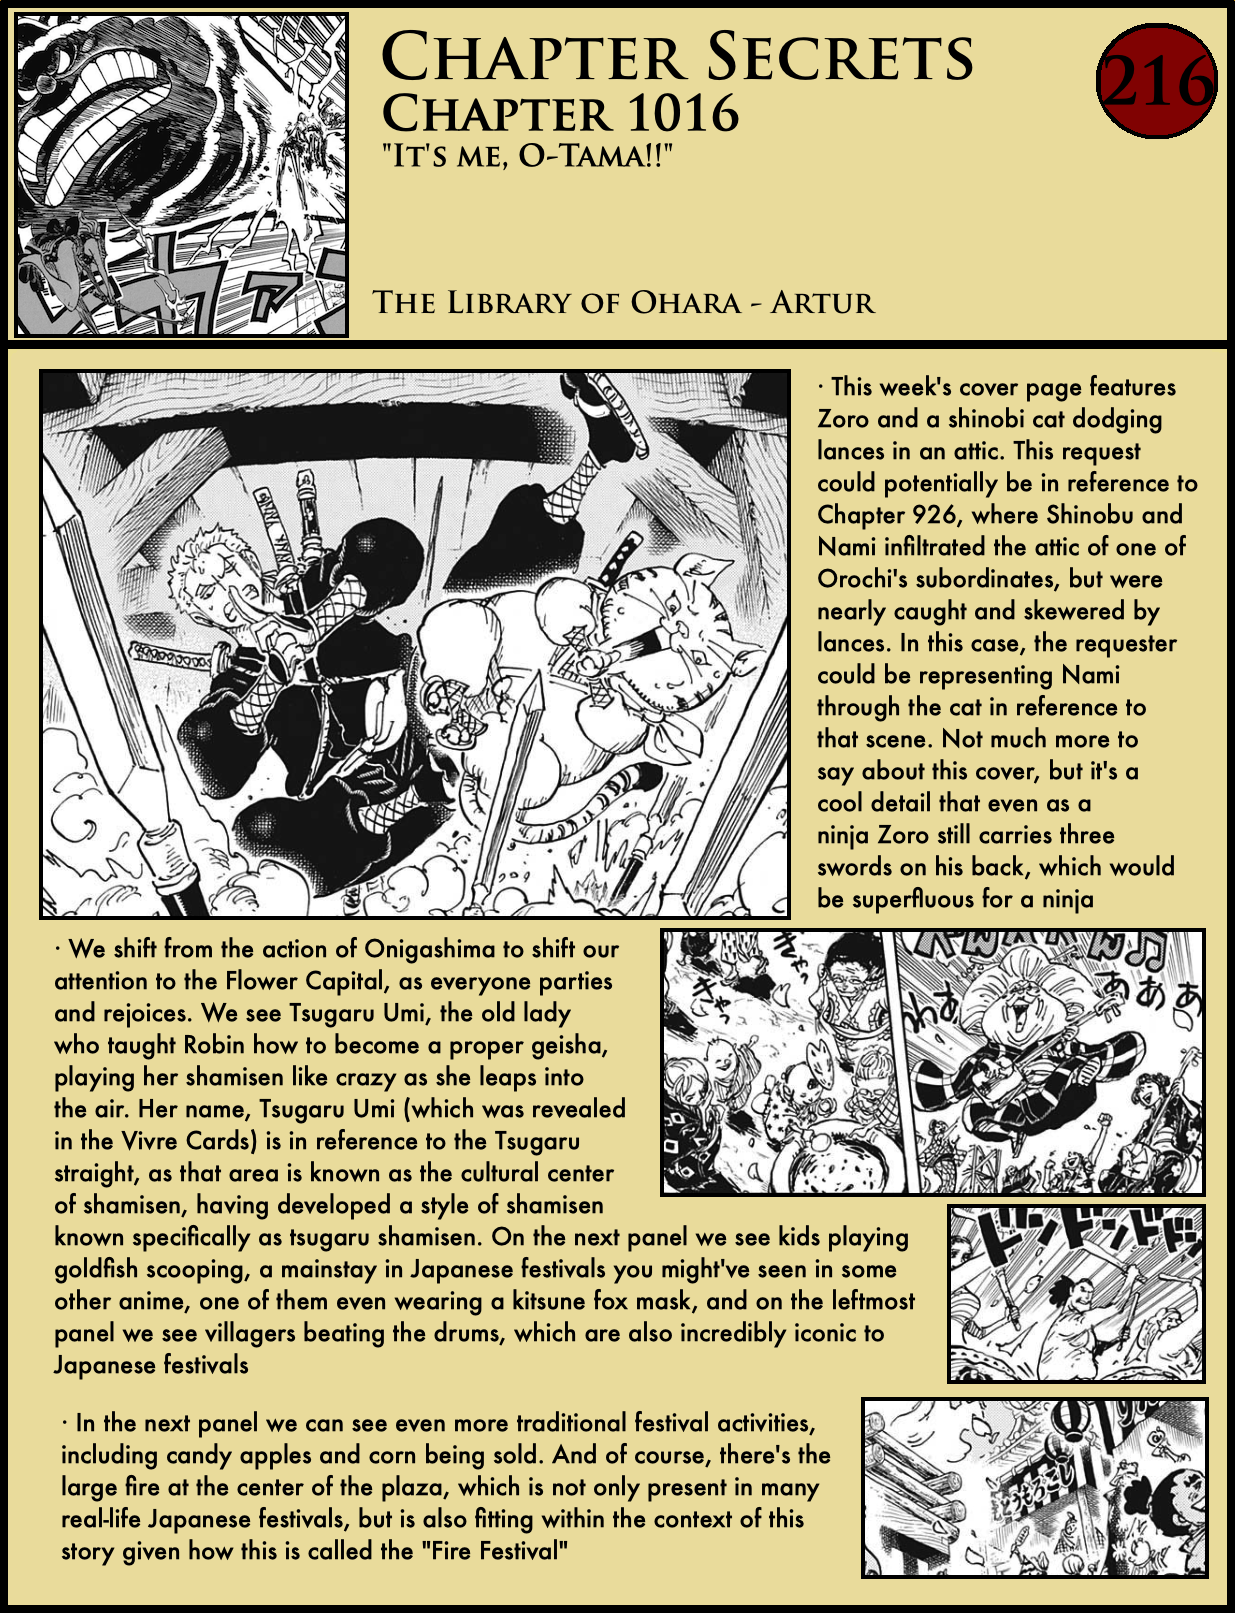 Chapter Secrets Chapter 1016 In Depth Analysis The Library Of Ohara